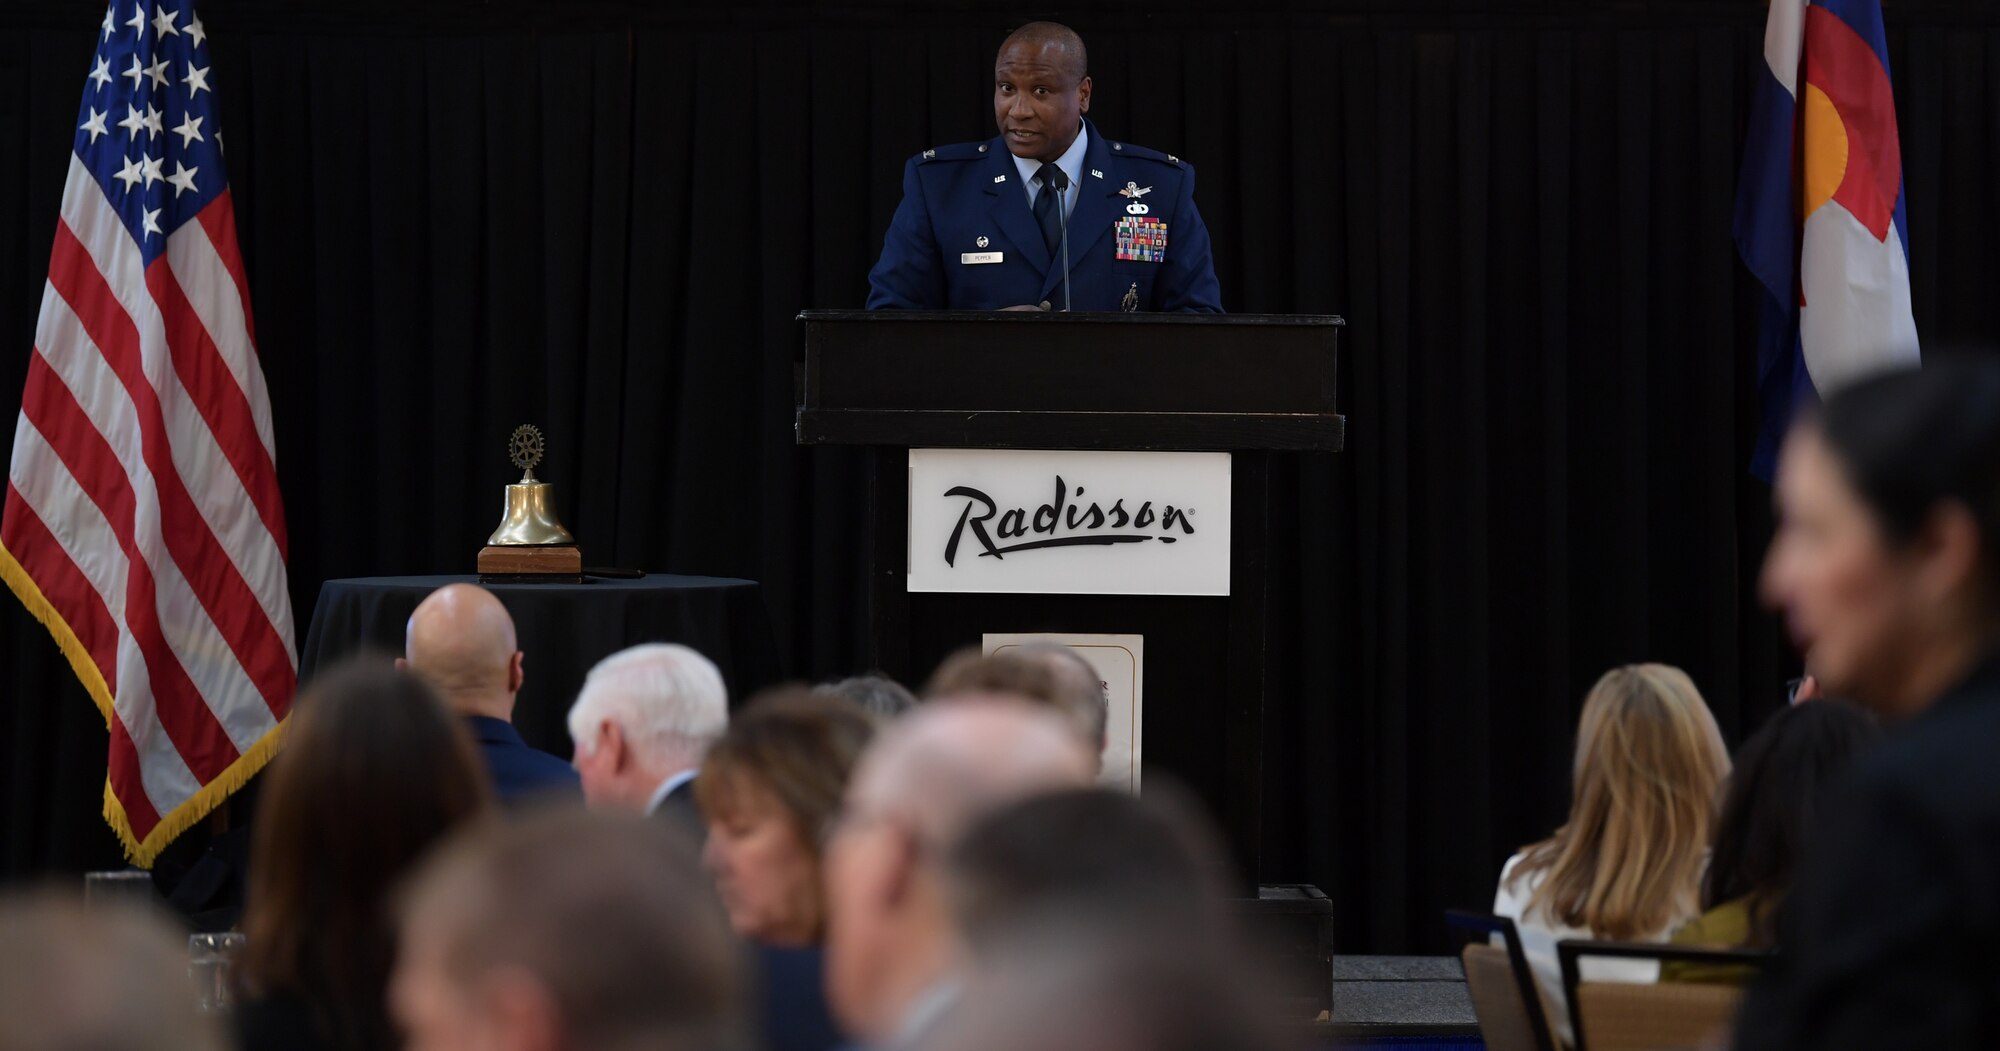 Col. Devin Pepper, 460th Space Wing commander, addresses over 250 members from the local community during the annual State of the Base luncheon at the Radisson Hotel in Aurora, Co., on Jan. 22, 2020